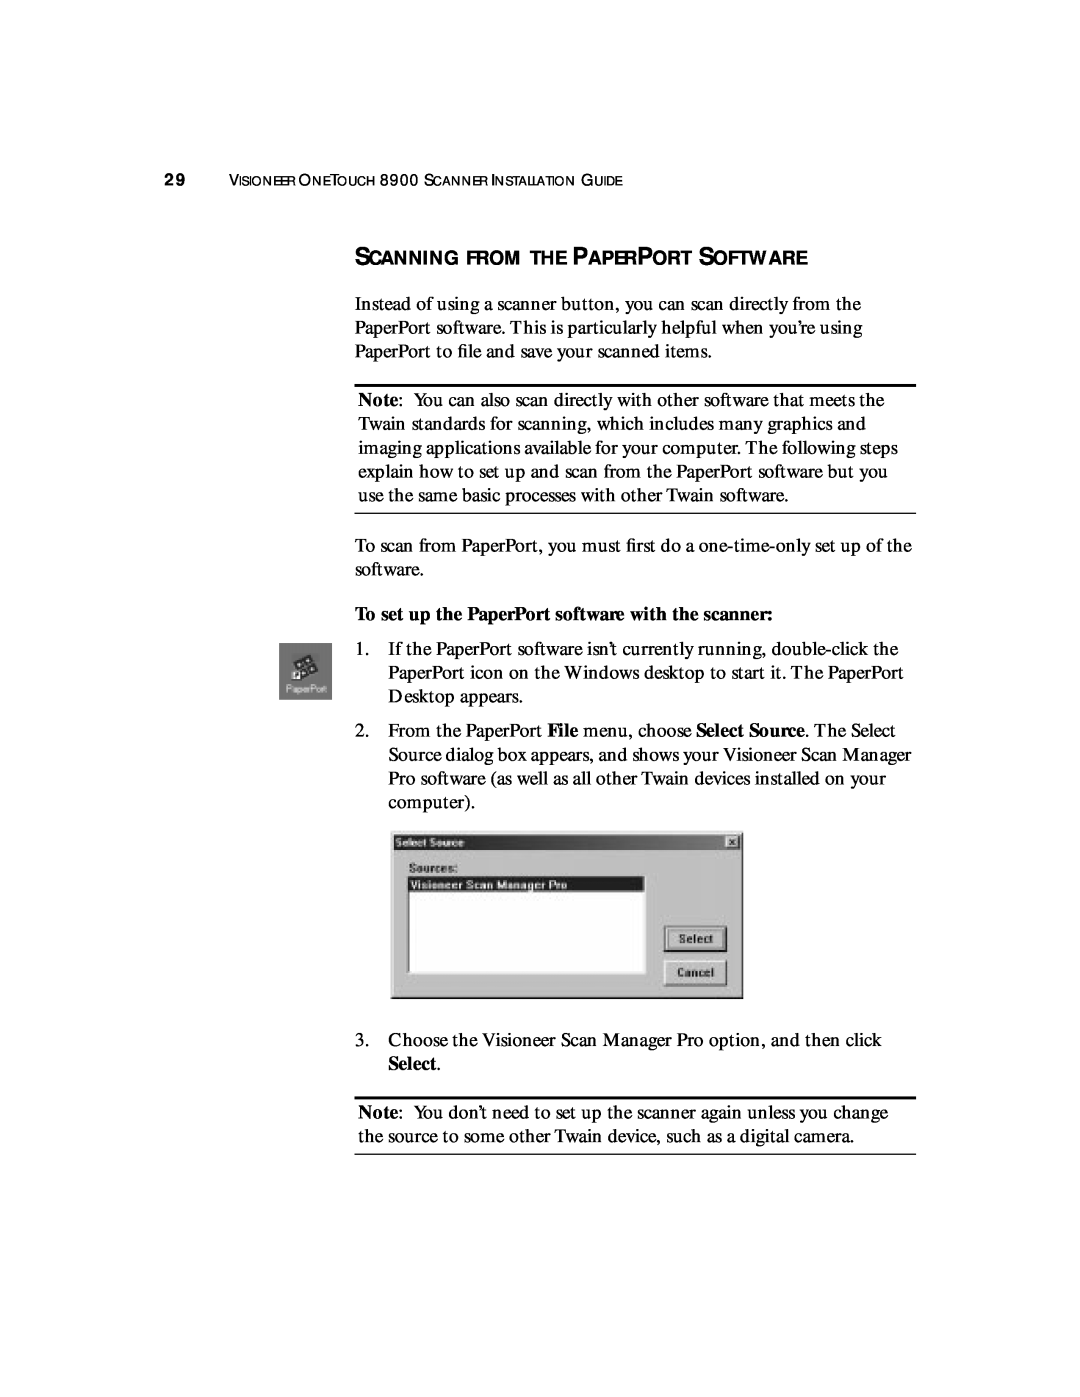 Visioneer 8900 manual Scanning From The Paperport Software, To set up the PaperPort software with the scanner 